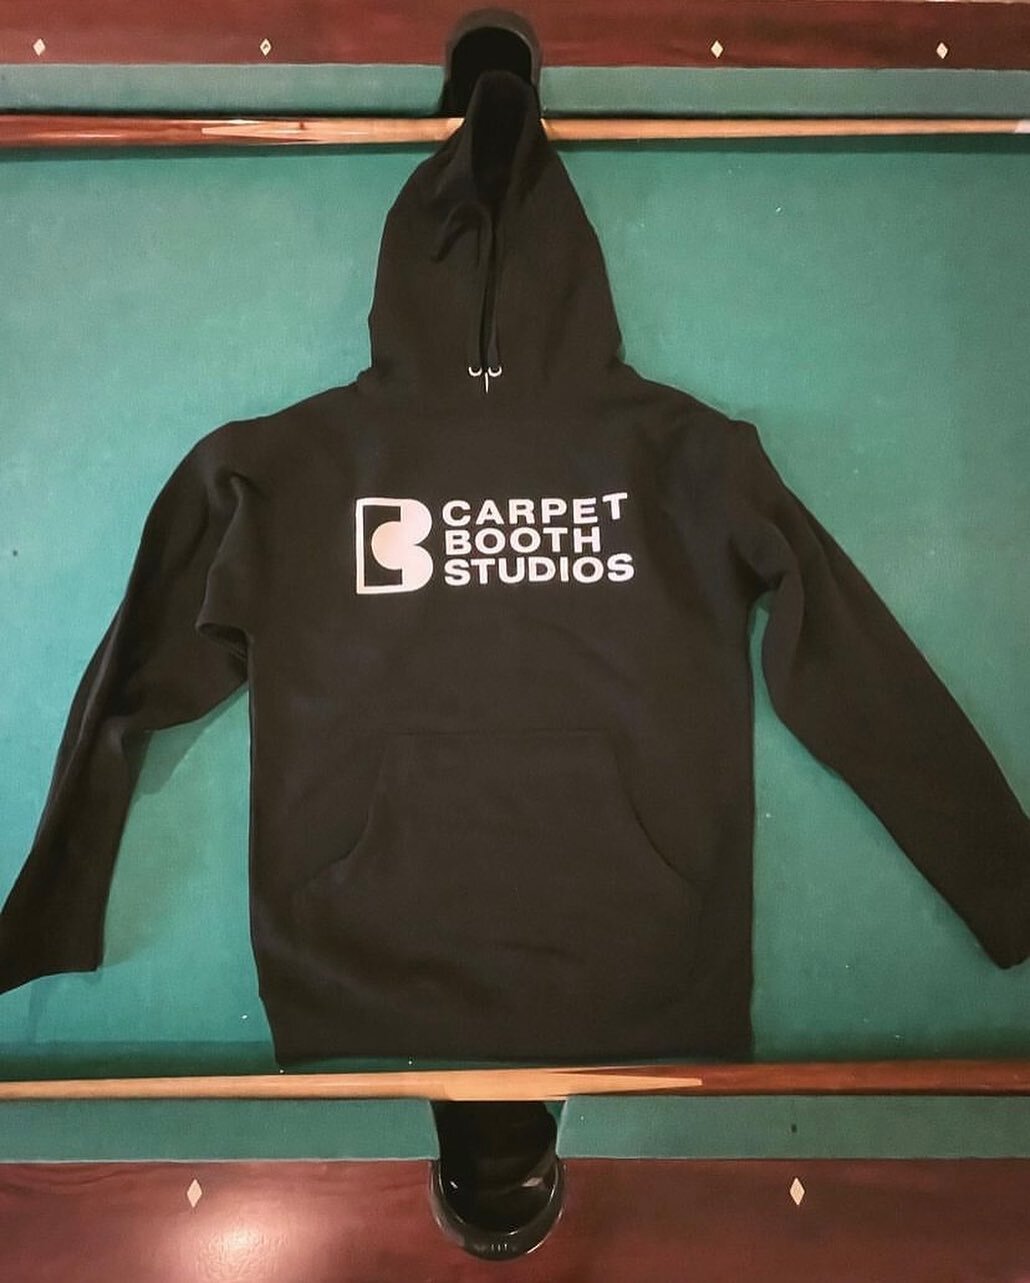 I&rsquo;m a sucker for a good promo pic! Hoodie prints for @carpetbooth
Thanks Zach!
.
.
.
.
#recording #studio #carpetbooth #carpetboothstudios #mn #recordingstudio #merch #screenprinting #print #jensoncreative